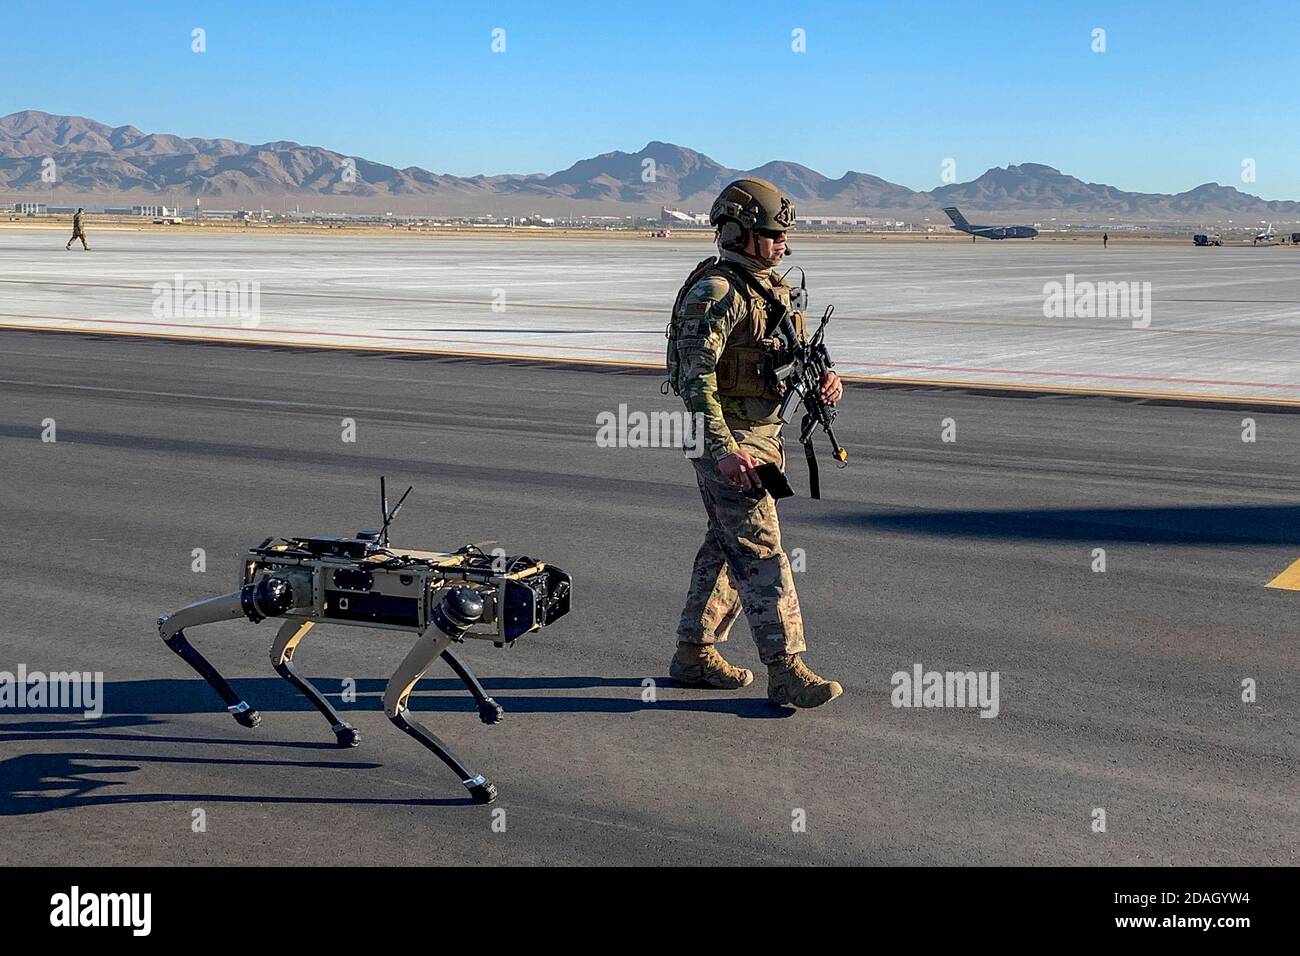 U.S. Air Force Tech. Sgt. Johnny Rodriguez walks alongside the Ghost Q-UGV unmanned ground vehicle known as the robotic dog, during a Advanced Battle Management System exercise at Nellis Air Force Base September 3, 2020 in Las Vegas, Nevada. Stock Photo